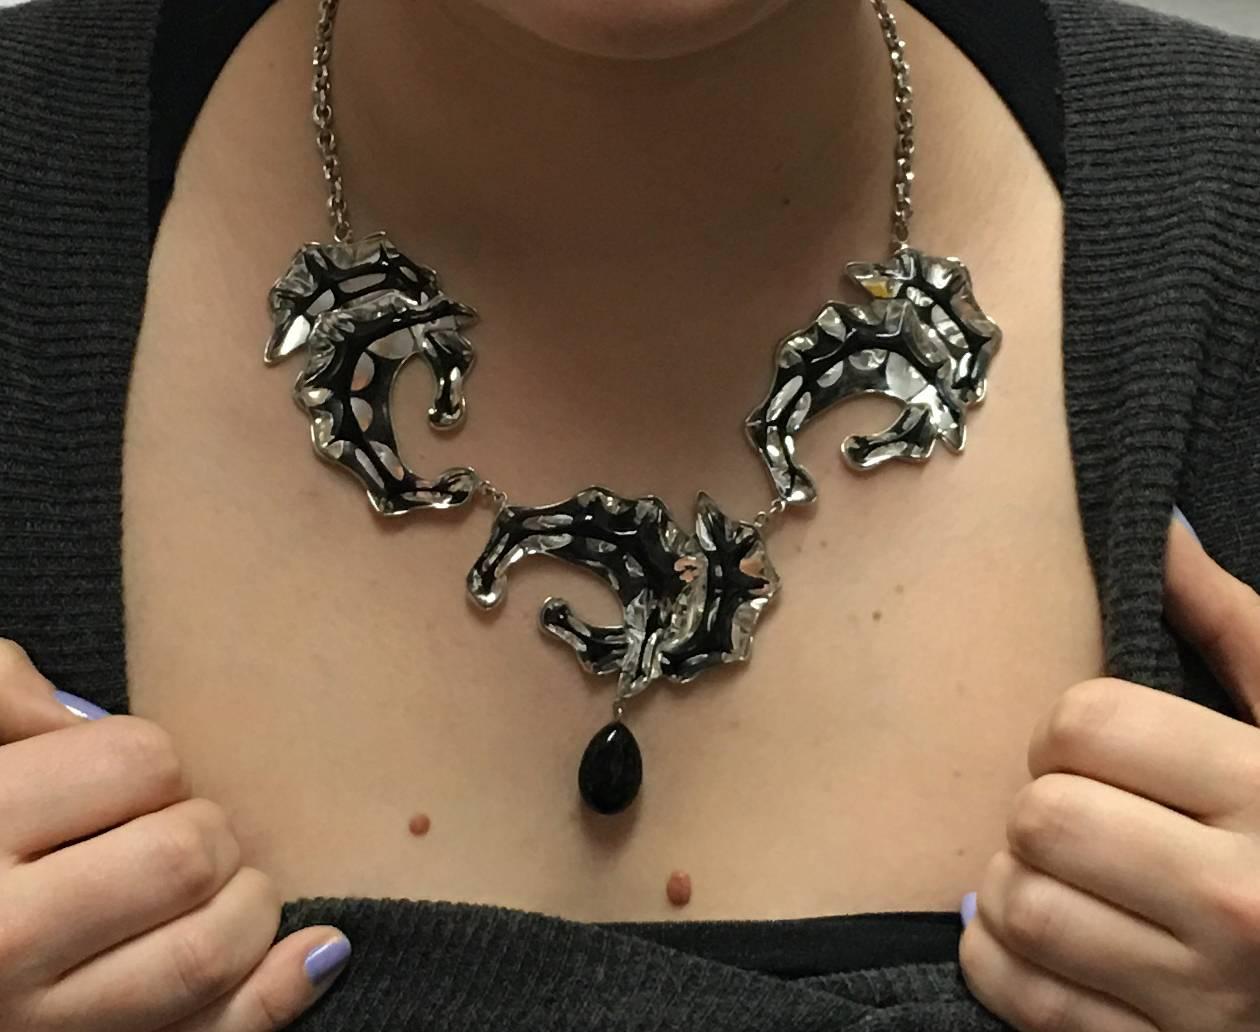 Lalique Stylized Seahorse Sterling Silver Necklace suspending a teardrop onyx; with adjustable Silver chain, ; marked: LALIQUE with French hallmarks; approx. total length: 24; in original LALIQUE box. Chic and Timeless...Illuminating your look with